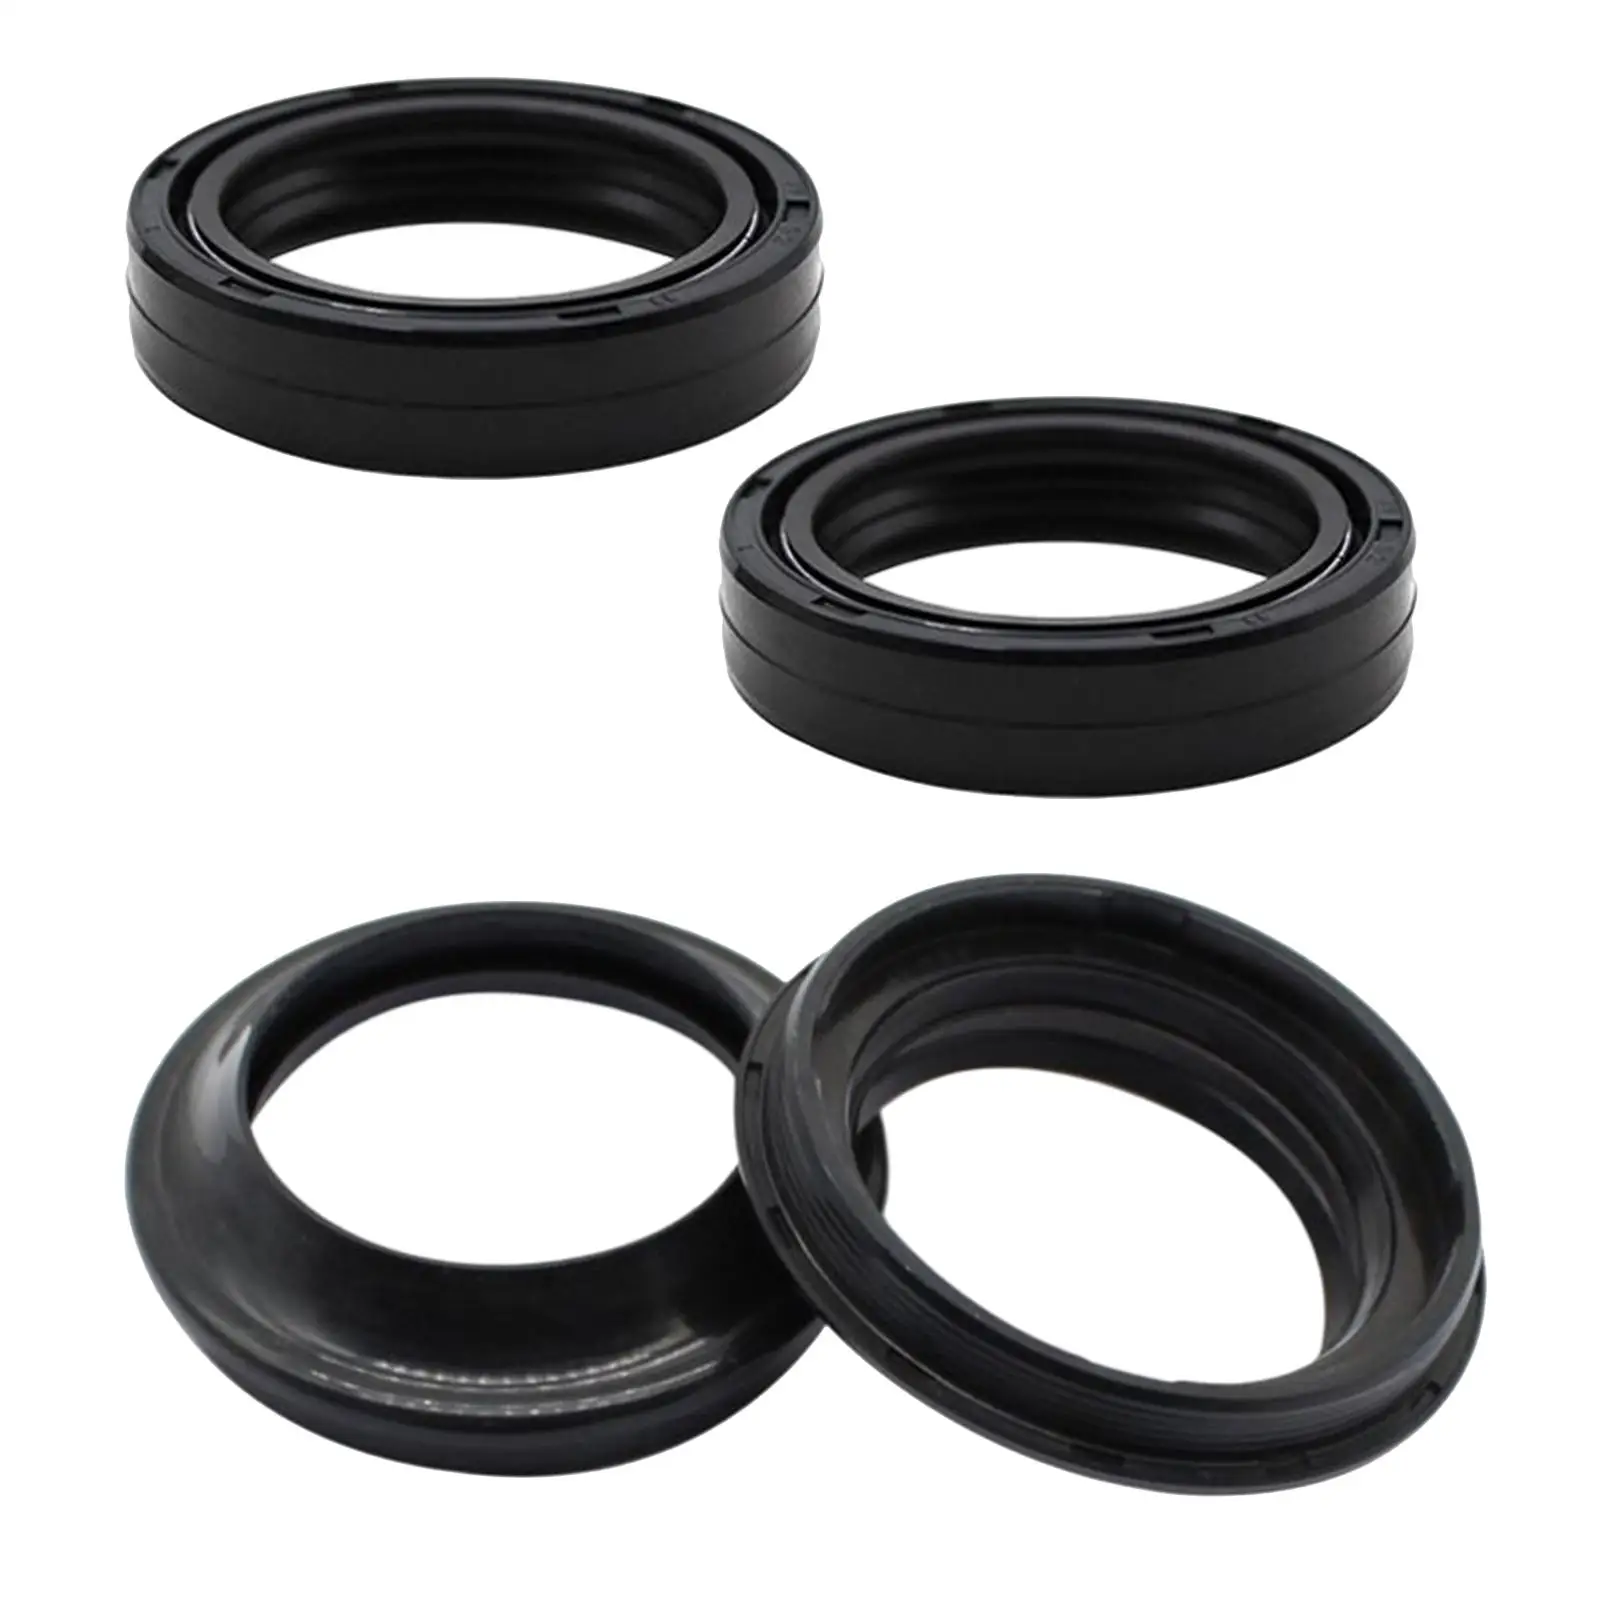 Motorcycle Fork Seal and Dust Seal Kit Rubber 49x60x10mm for Suzuki Rm-Z450 Dr-Z400SM RM250 Dr-Z400 Dr-Z400E